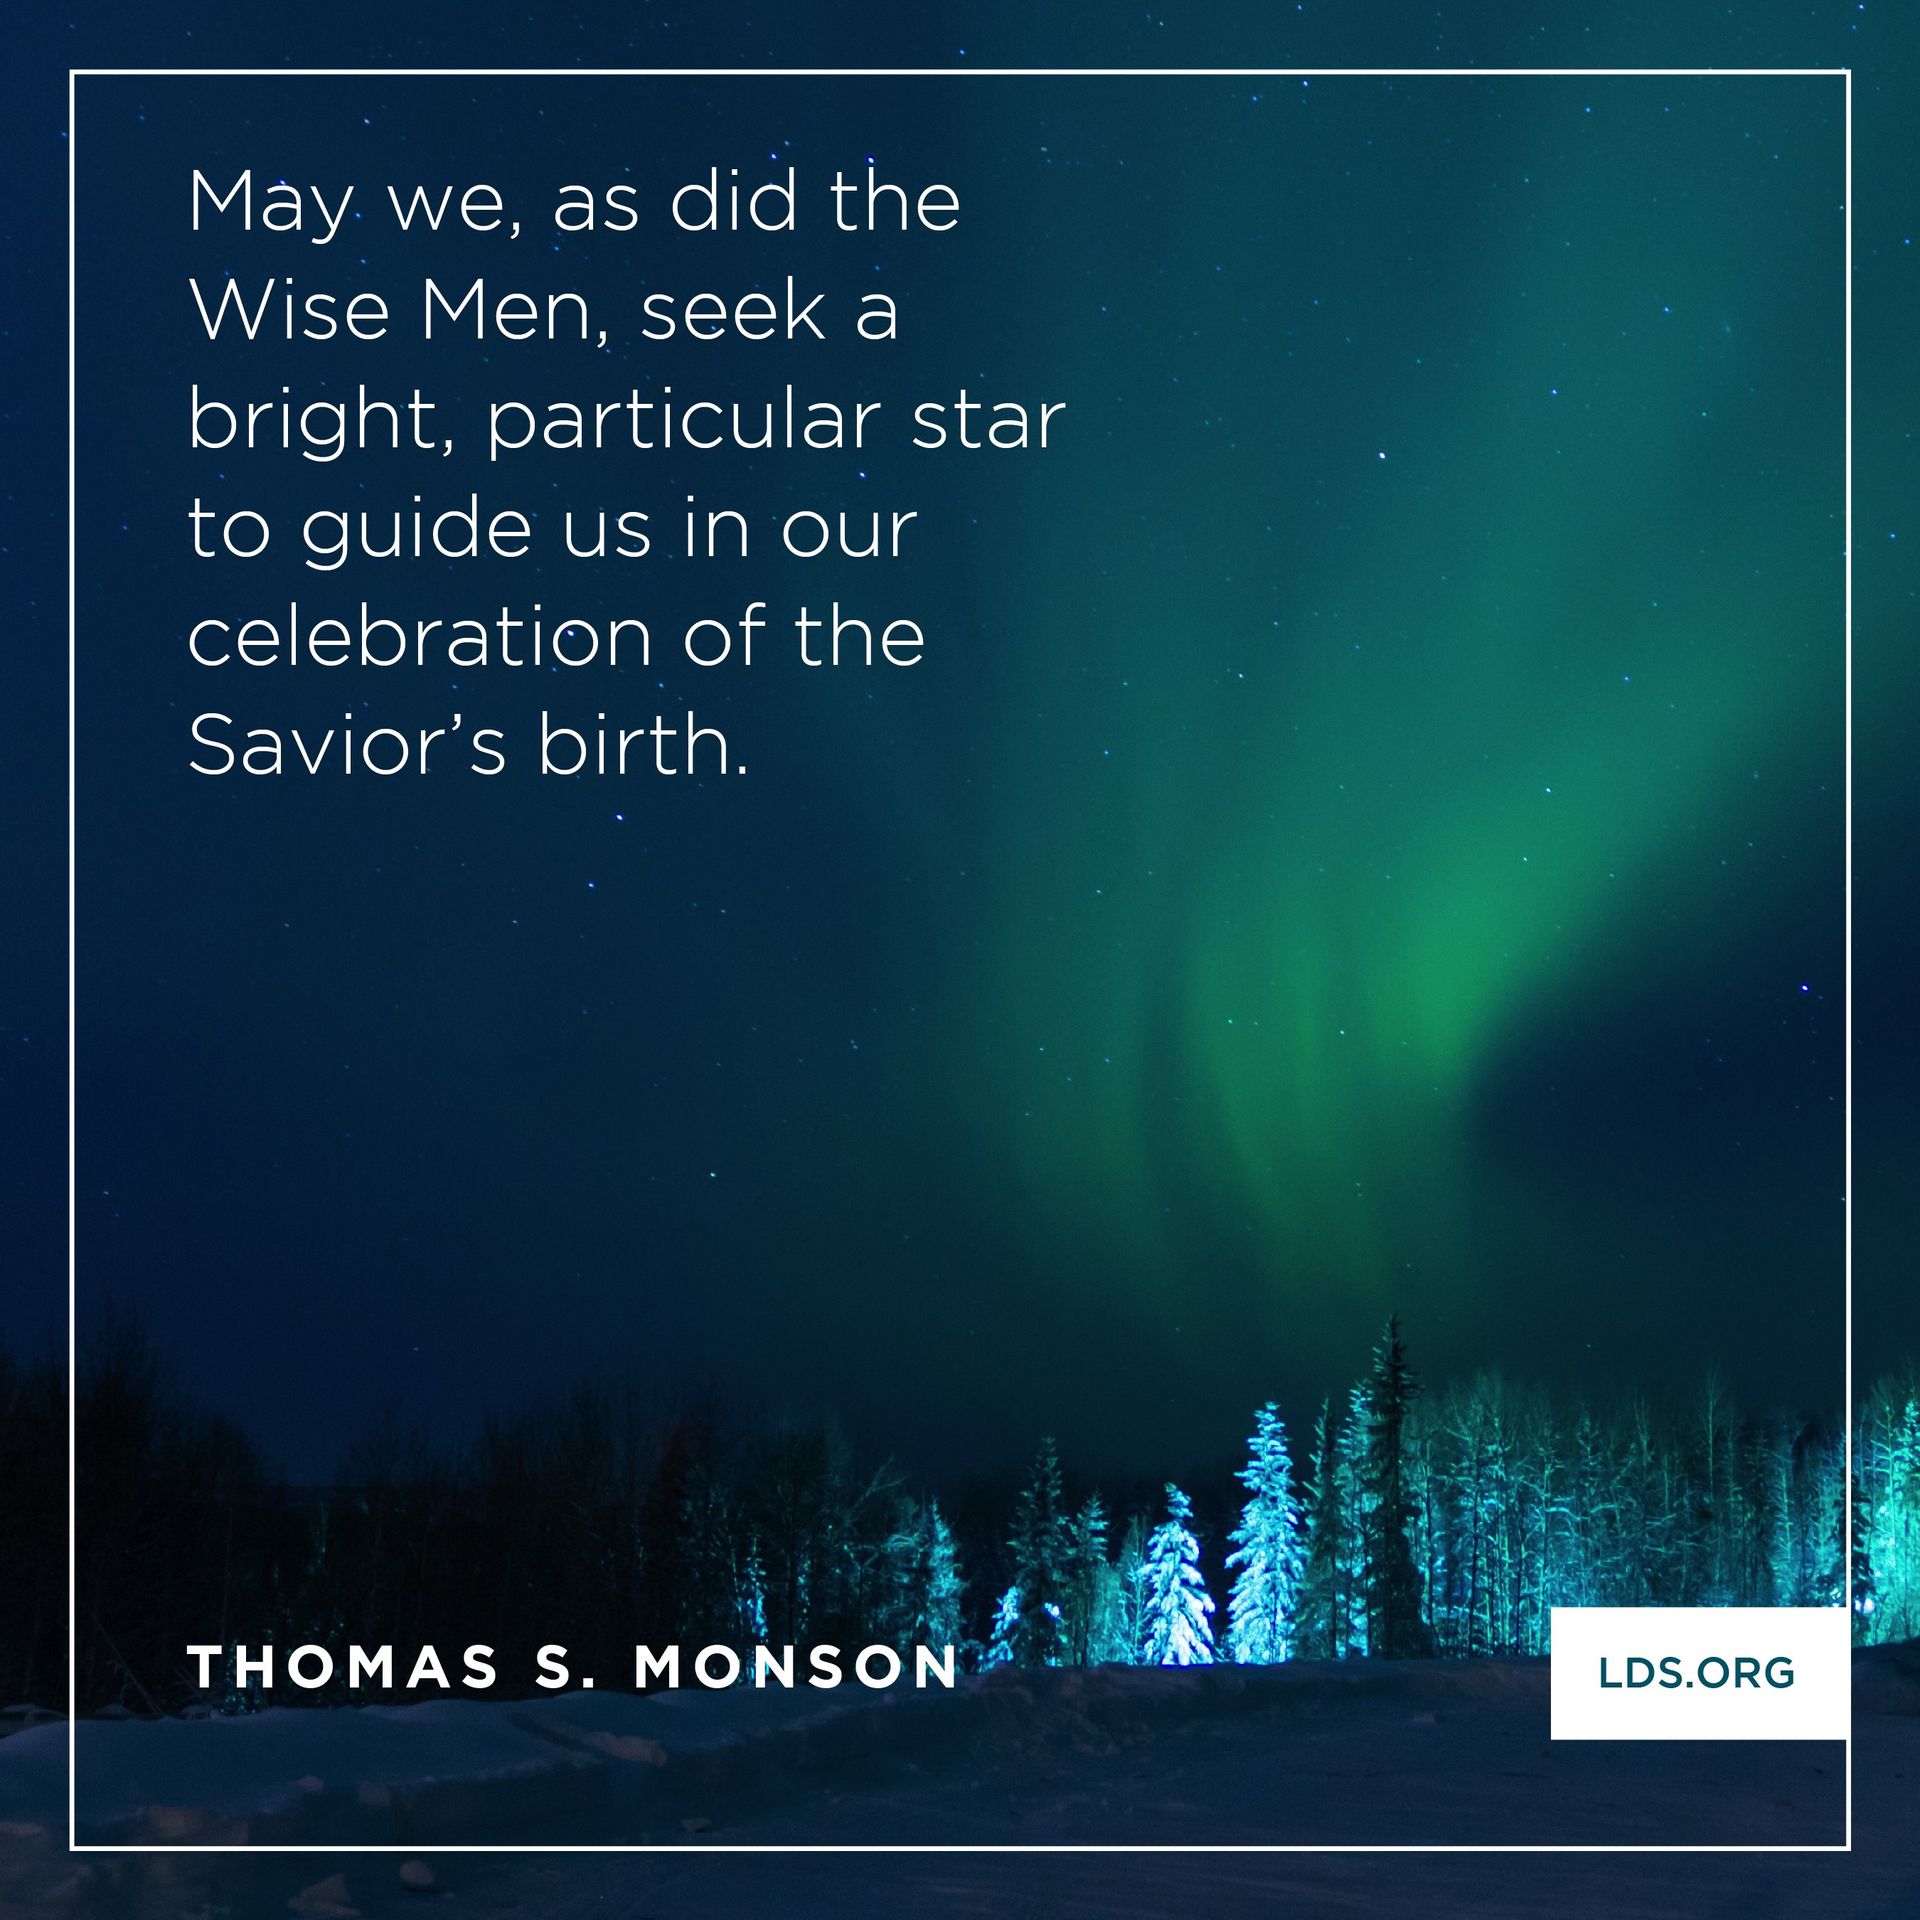 “May we, as did the Wise Men, seek a bright, particular star to guide us in our celebration of the Savior’s birth.”—President Thomas S. Monson, “The Real Joy of Christmas” © undefined ipCode 1.